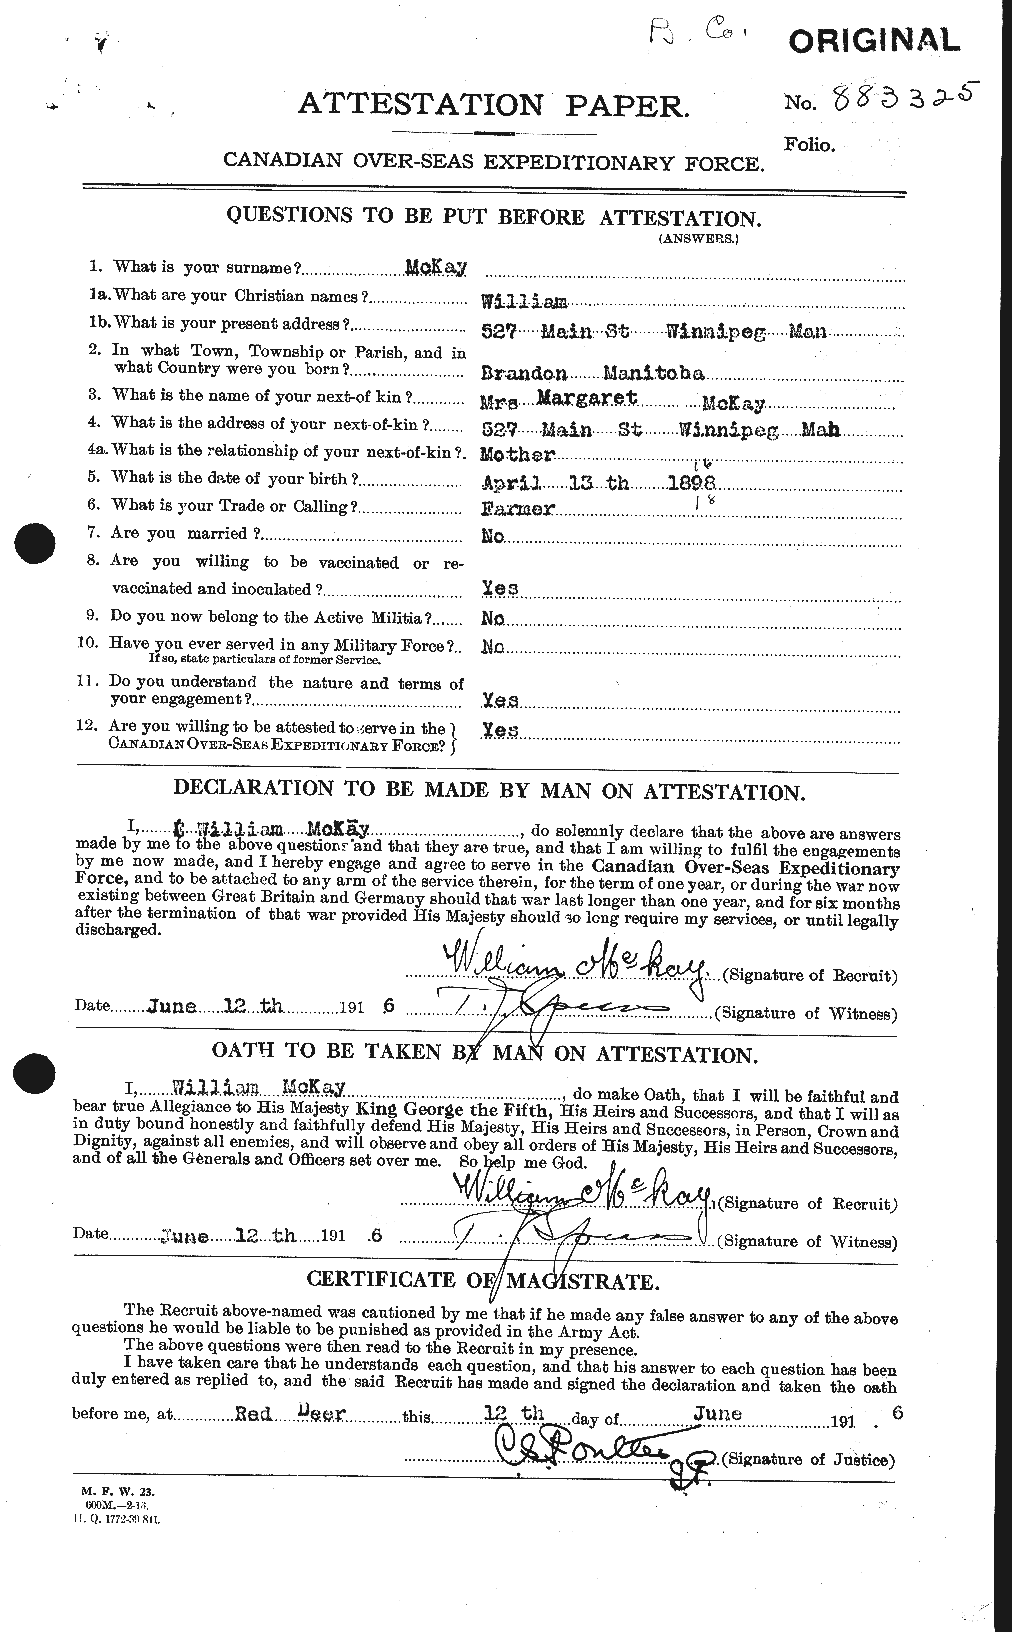 Personnel Records of the First World War - CEF 530216a